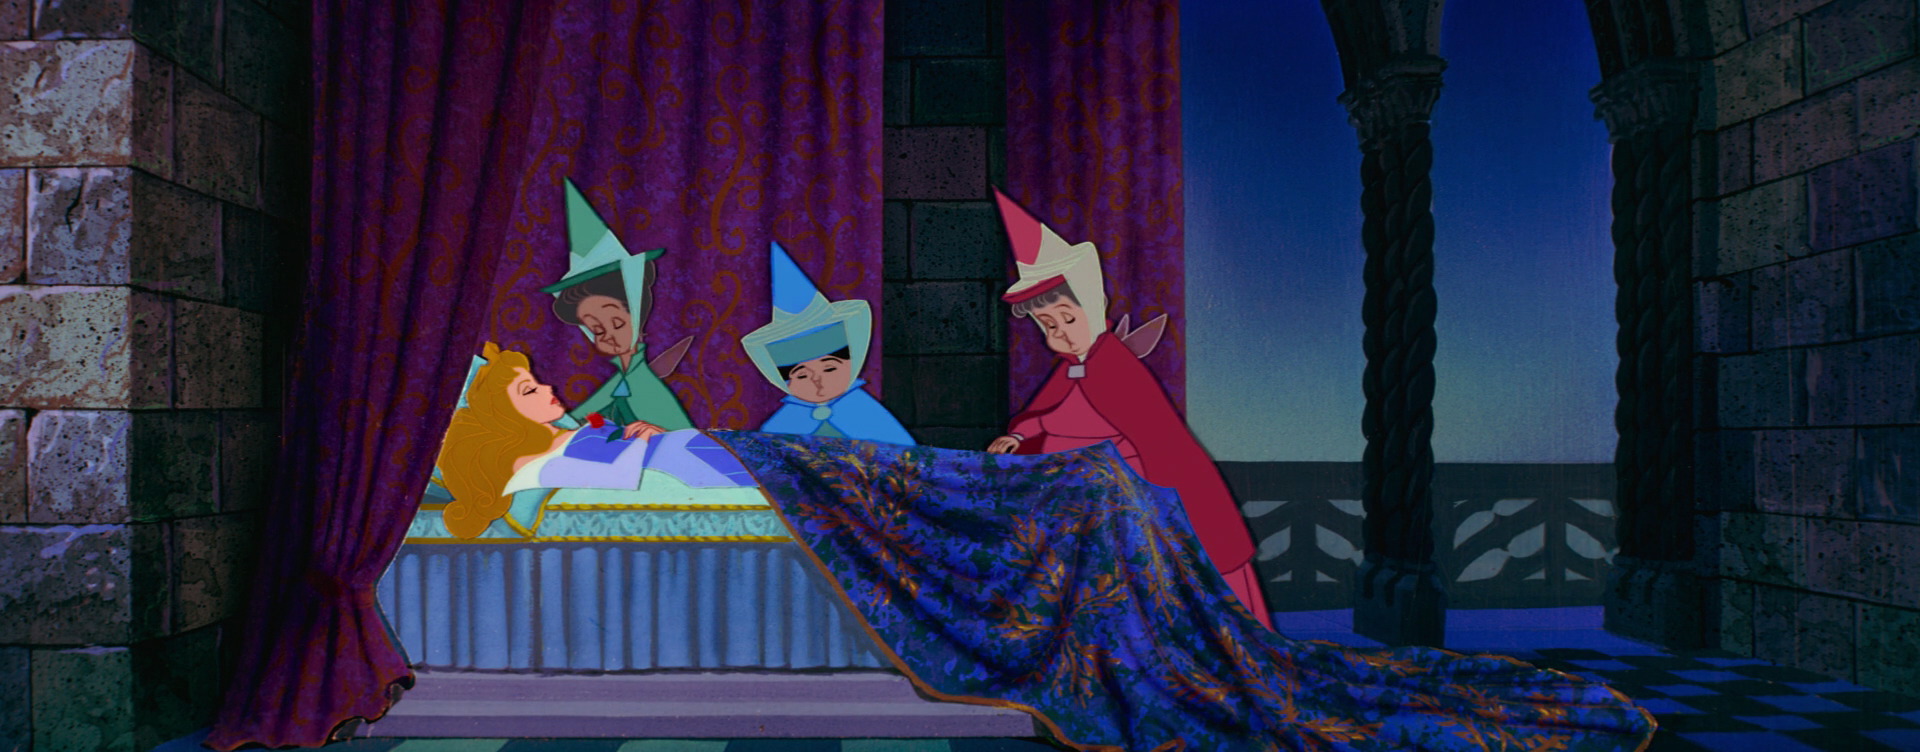 Coming Soon: Sleeping Beauty Castle Three Good Fairies Stained